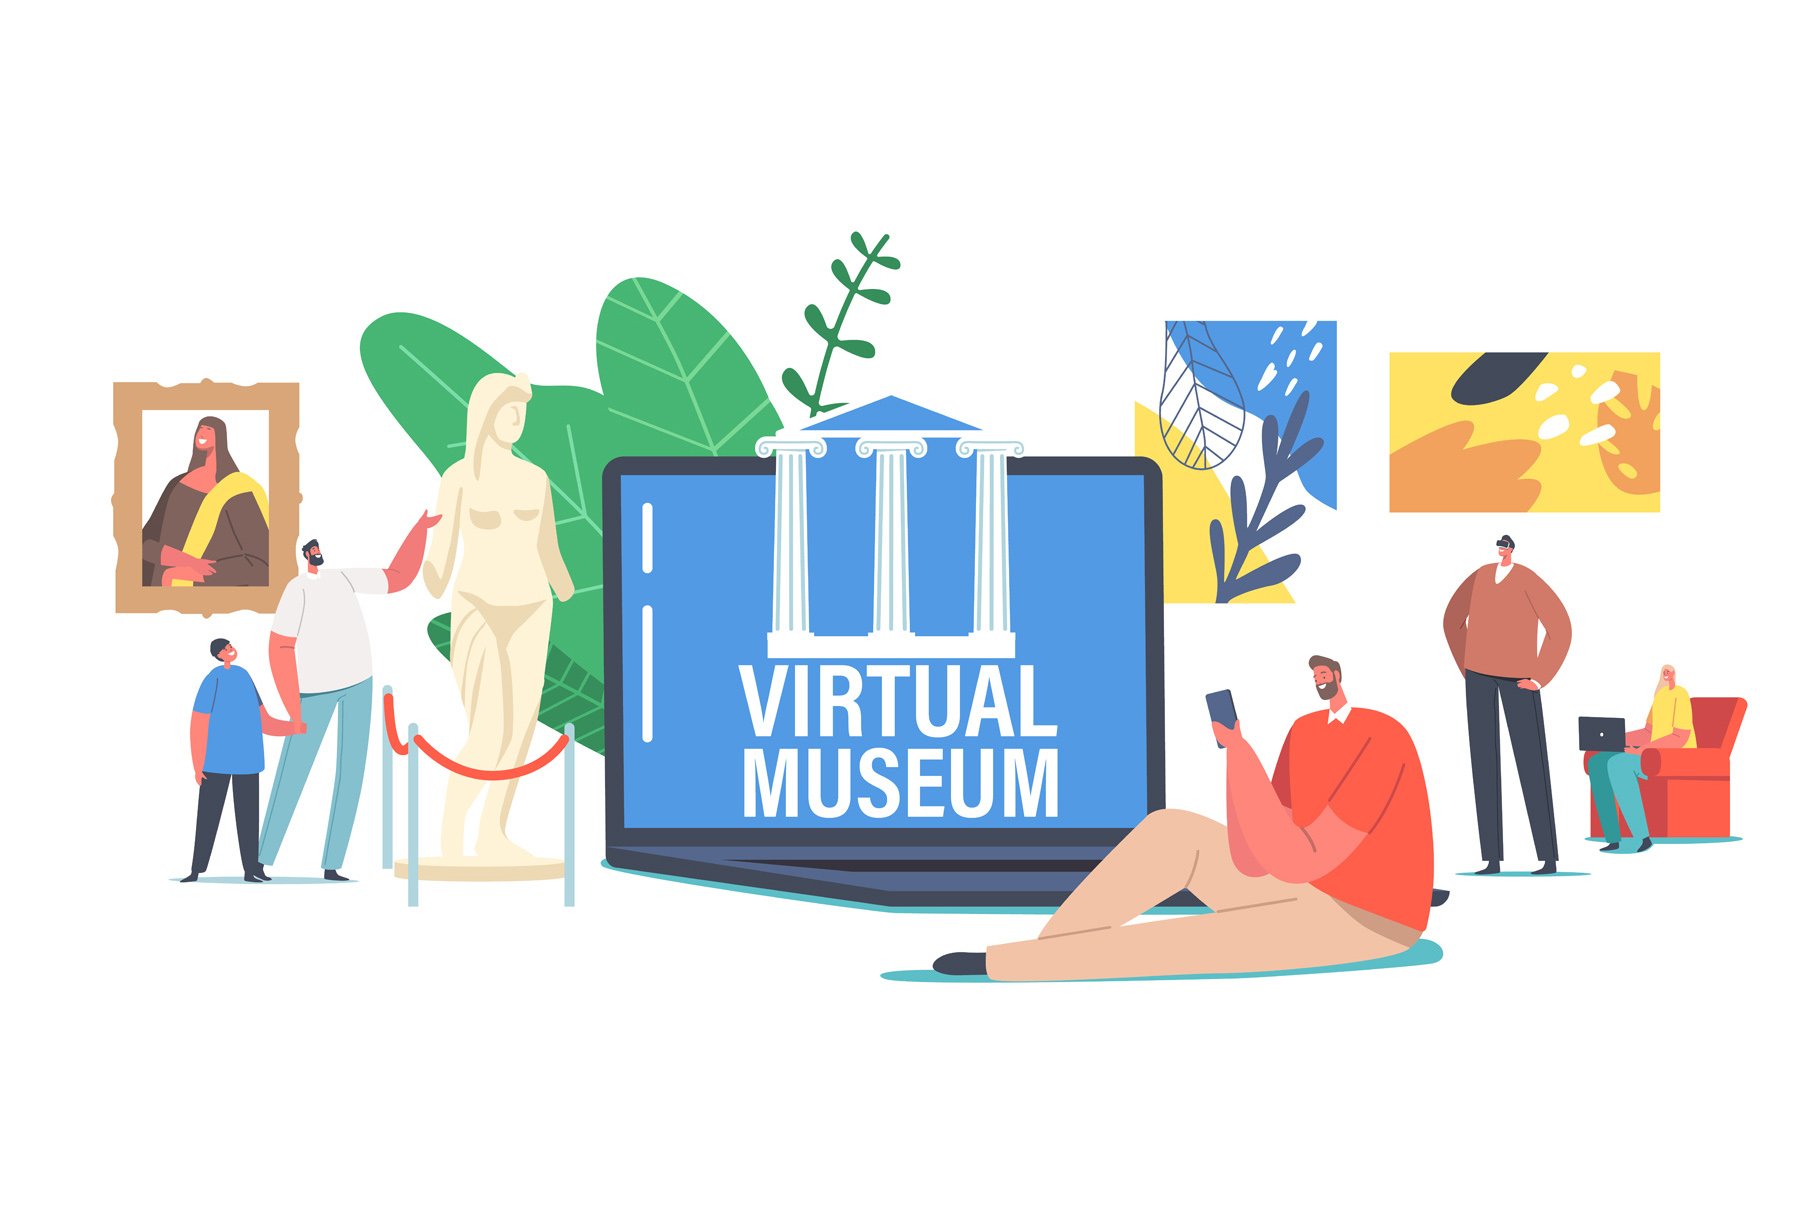 People Visiting Virtual Museum cover image.